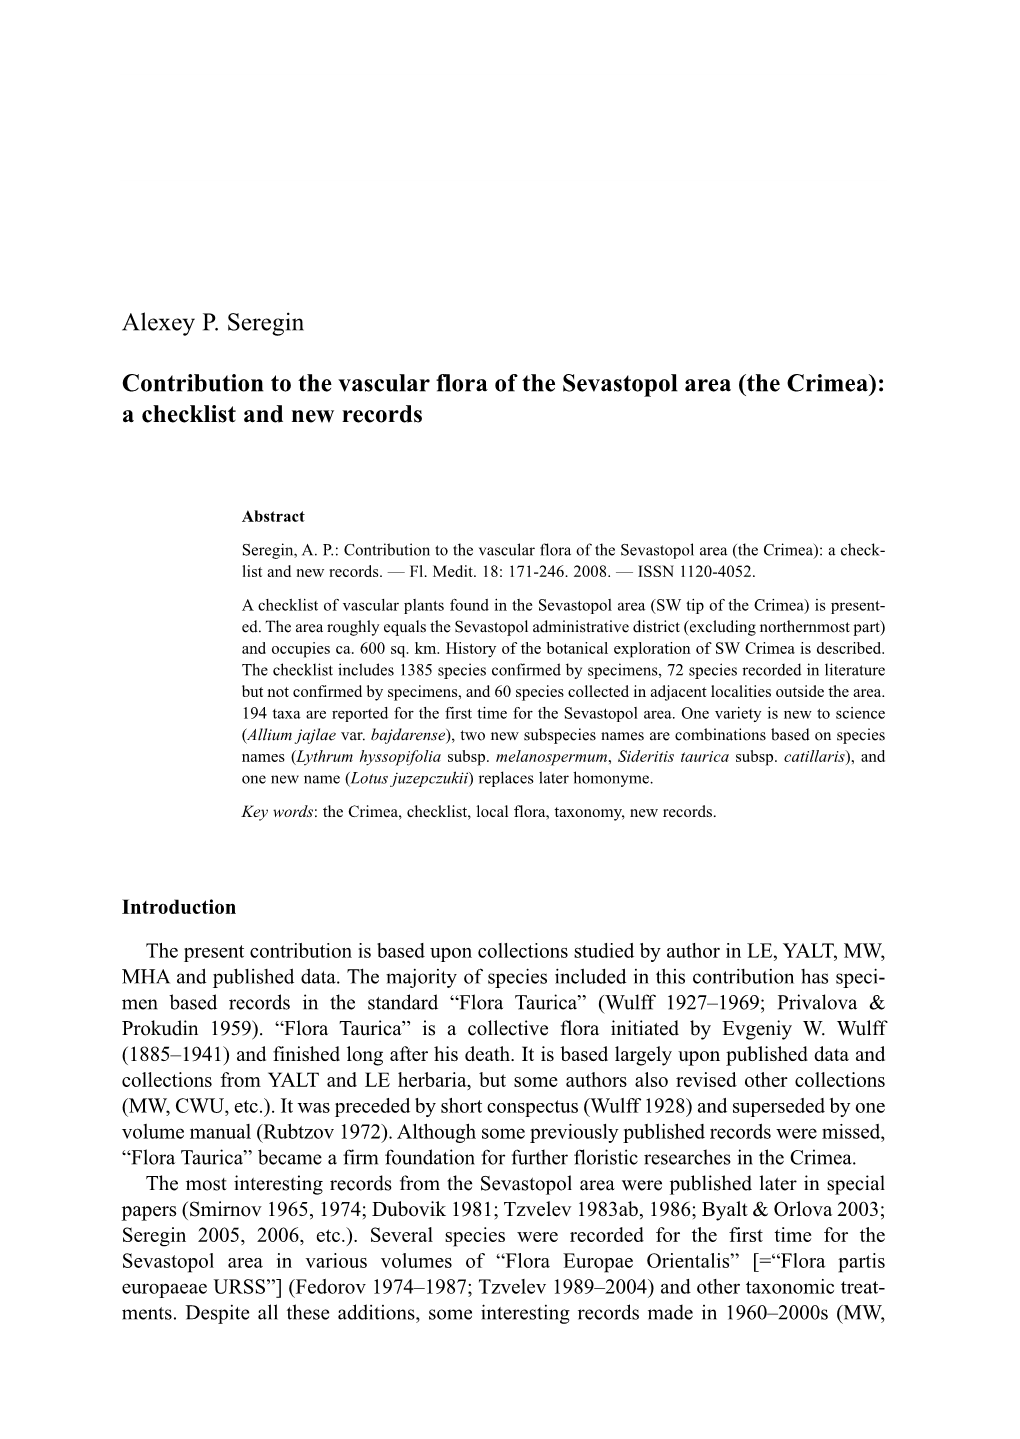 Contribution to the Vascular Flora of the Sevastopol Area (The Crimea): a Checklist and New Records